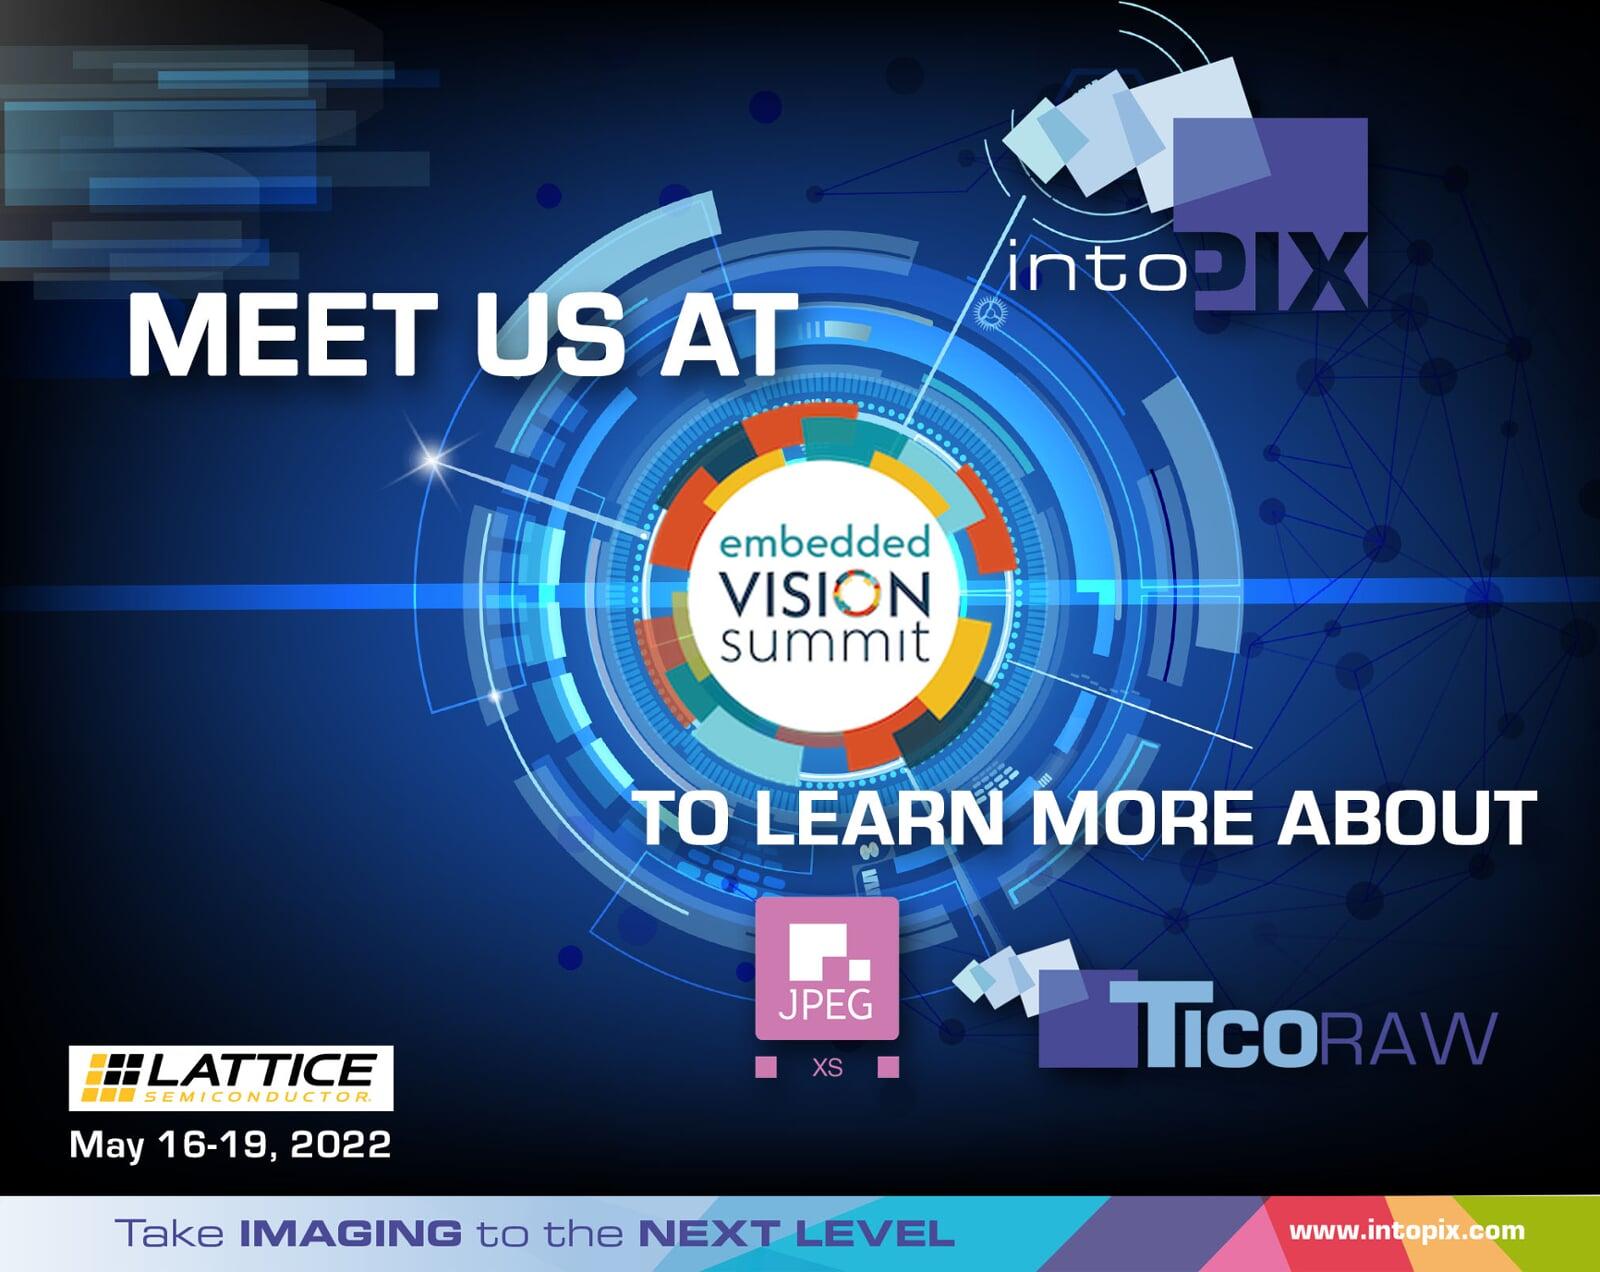 intoPIX to showcase its lightweight compression IP at Embedded Vision Summit 2022 on Lattice Booth